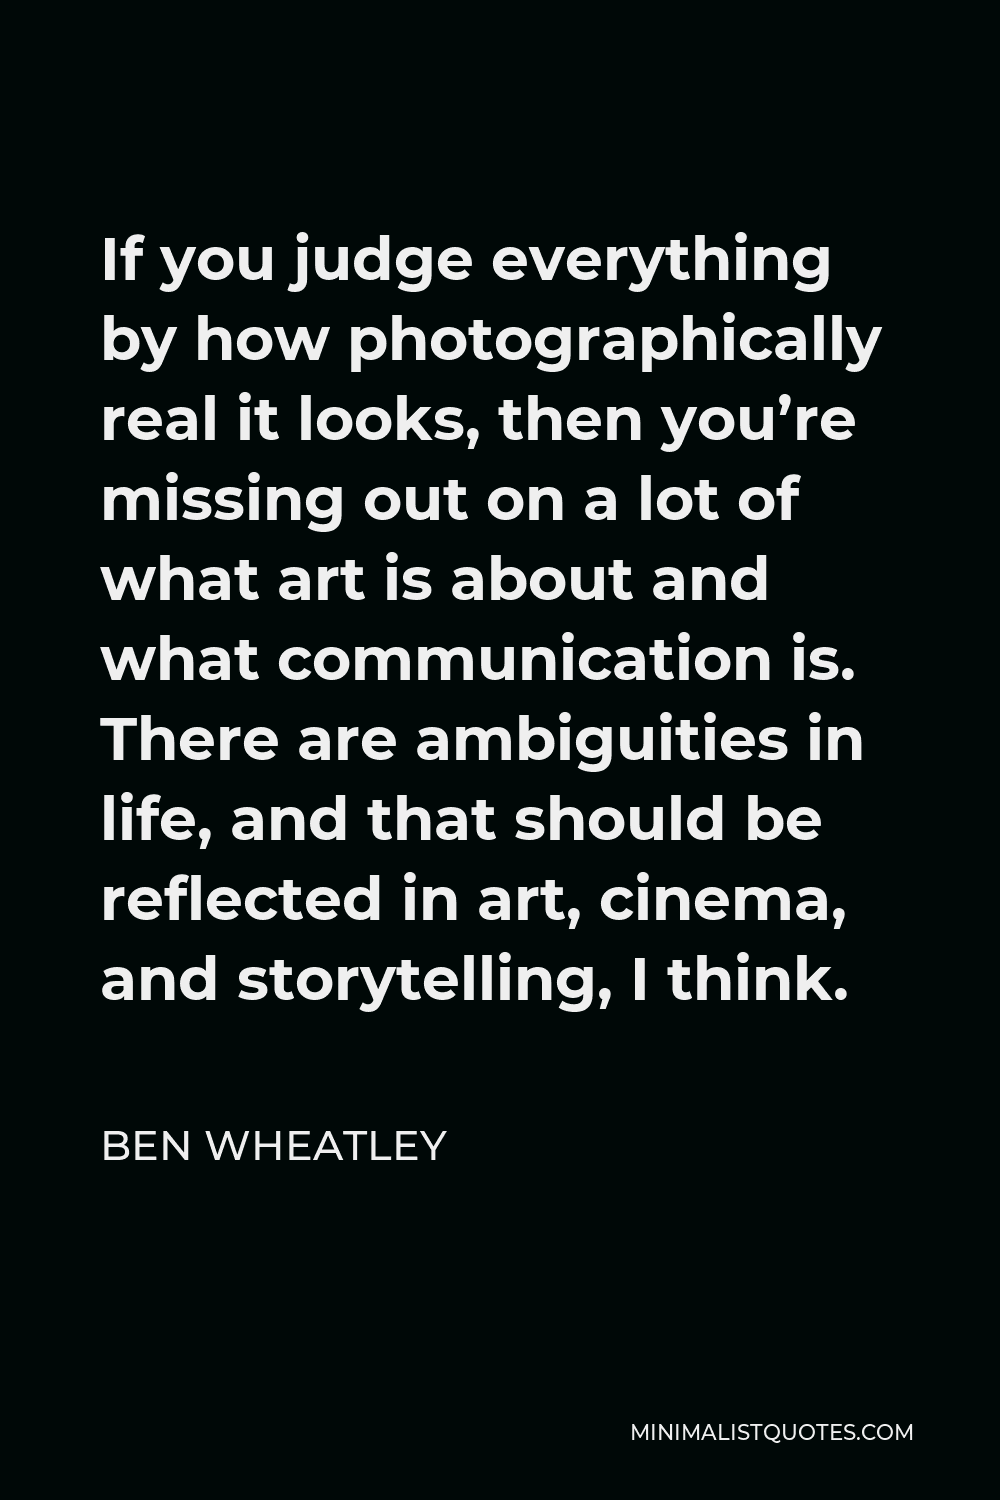 Ben Wheatley Quote - If you judge everything by how photographically real it looks, then you’re missing out on a lot of what art is about and what communication is. There are ambiguities in life, and that should be reflected in art, cinema, and storytelling, I think.